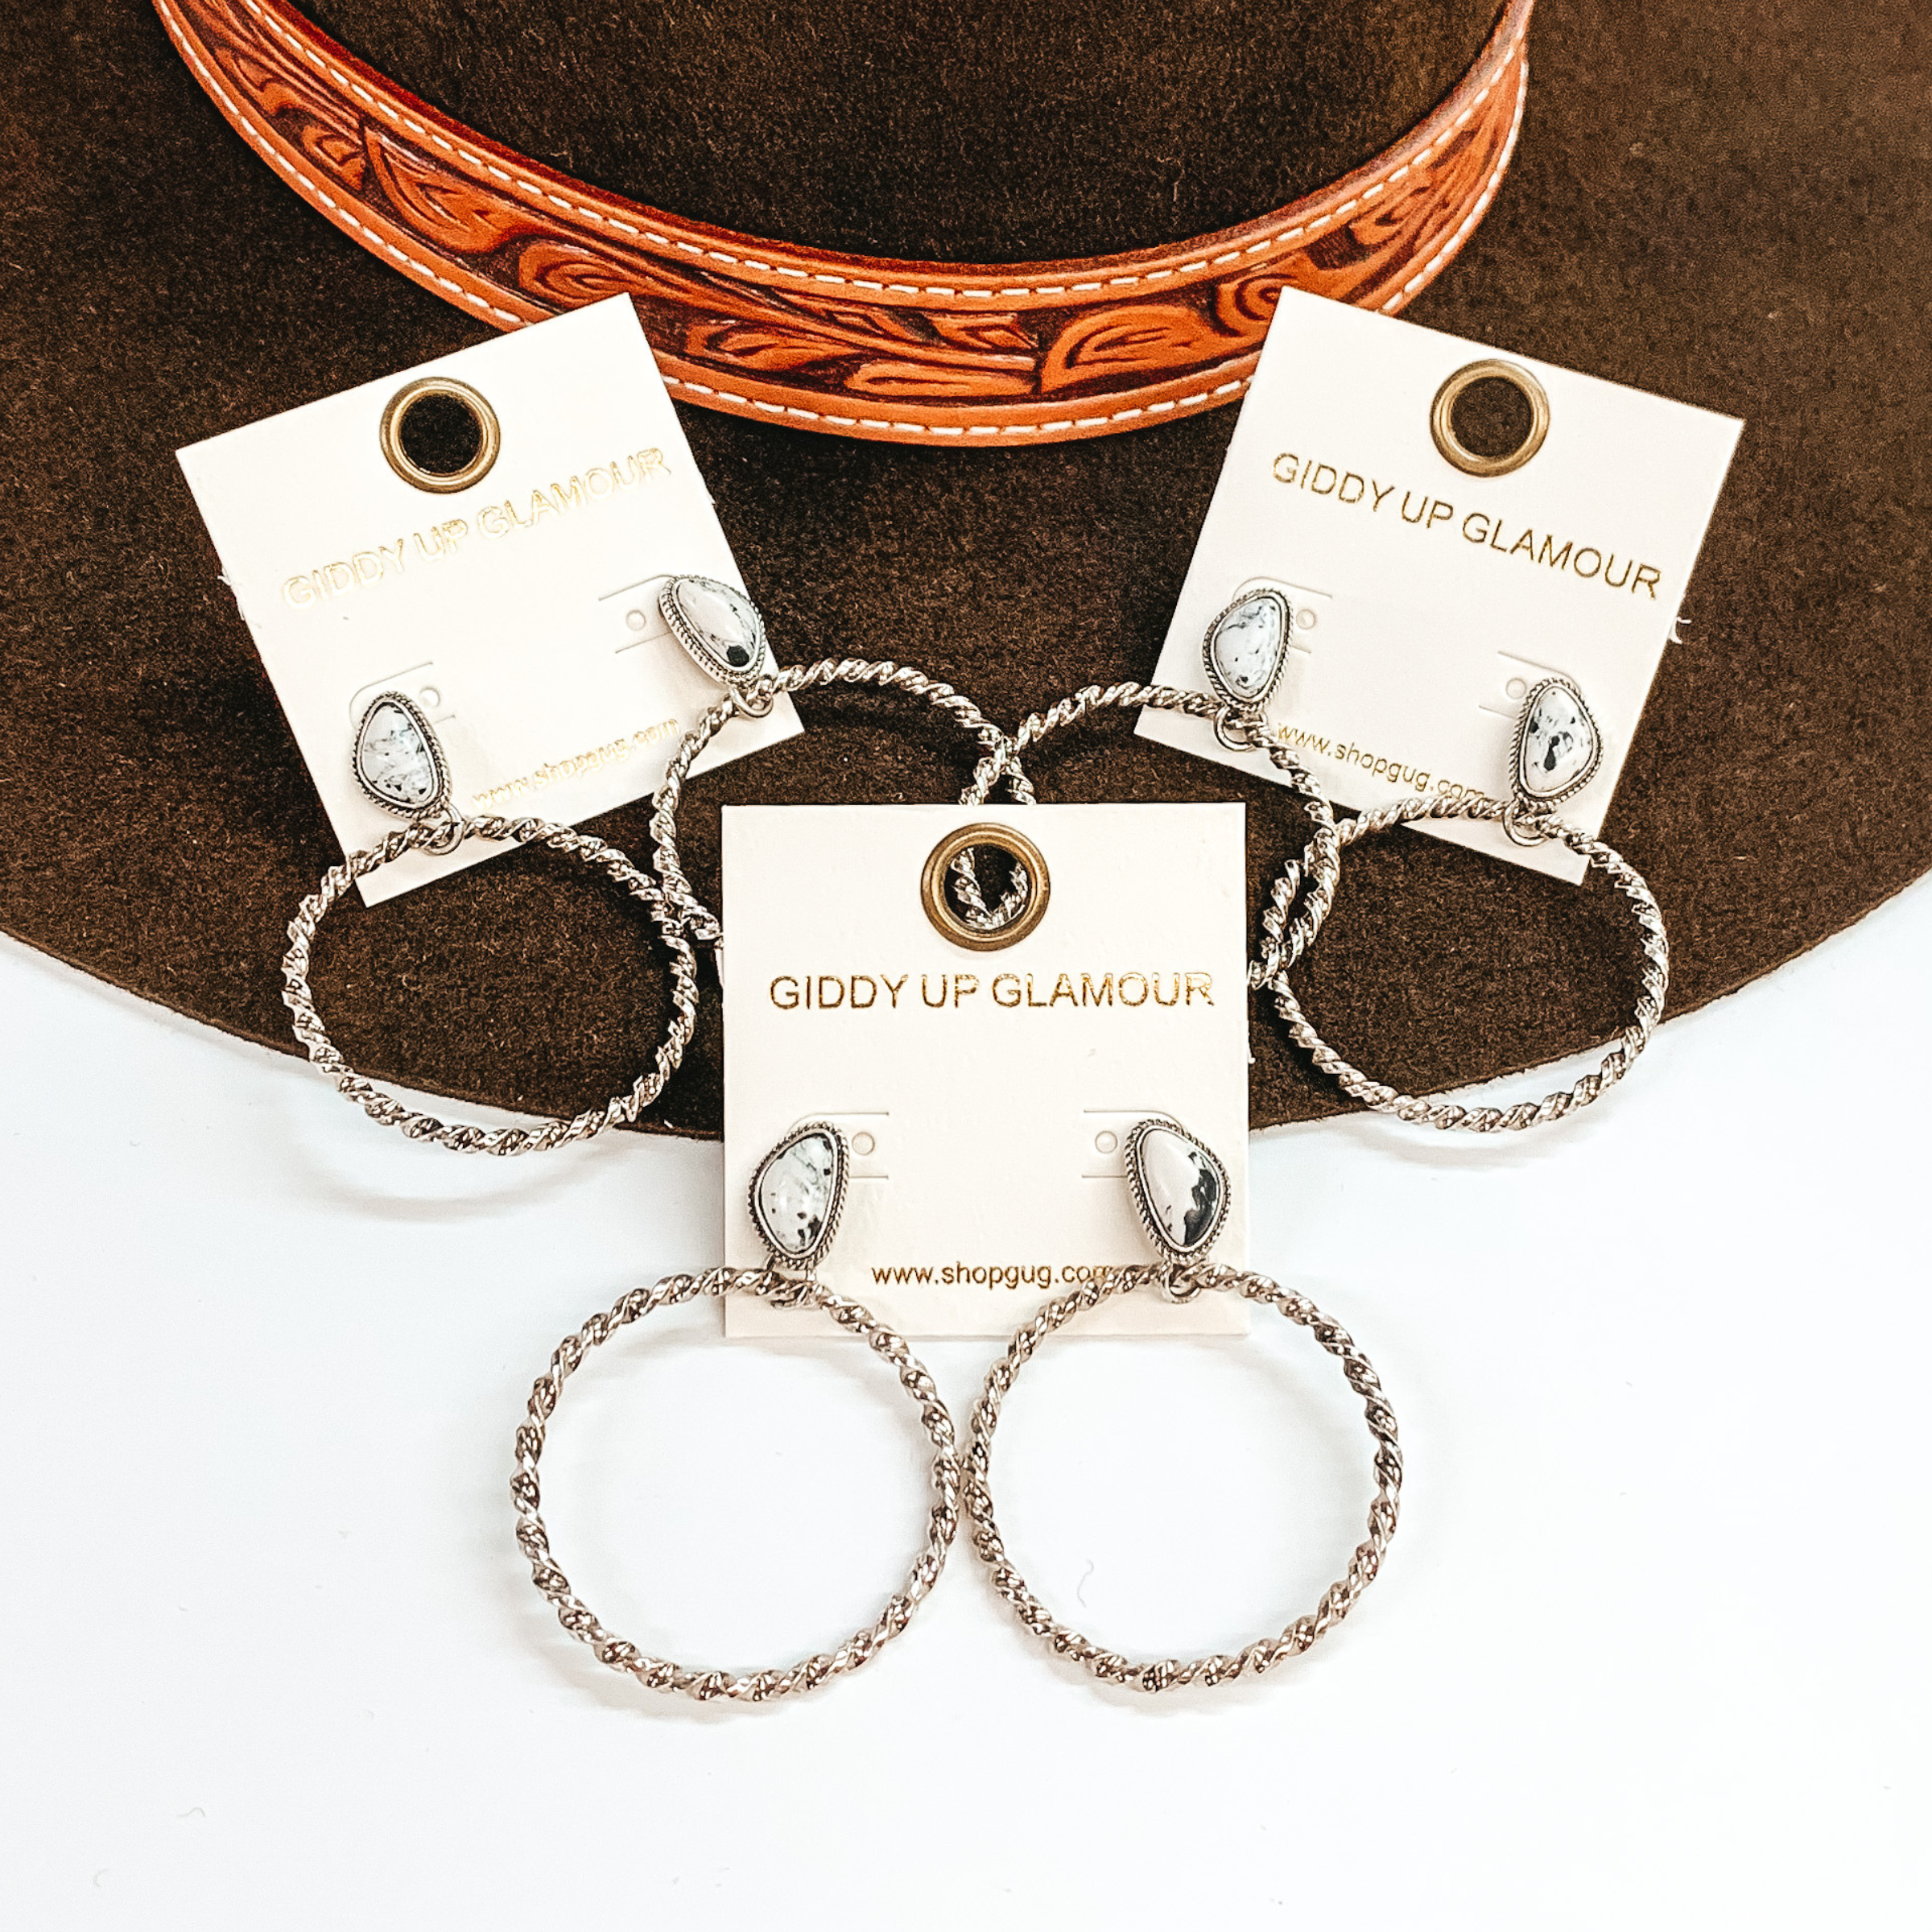 These are three pairs of silver circle drop earrings with an asymmetrical  white and black mix stone post backing. The circle drop has a twisted  rope texture in silver. These earrings are taken laying on  a dark brown hat brim  and on a white background.